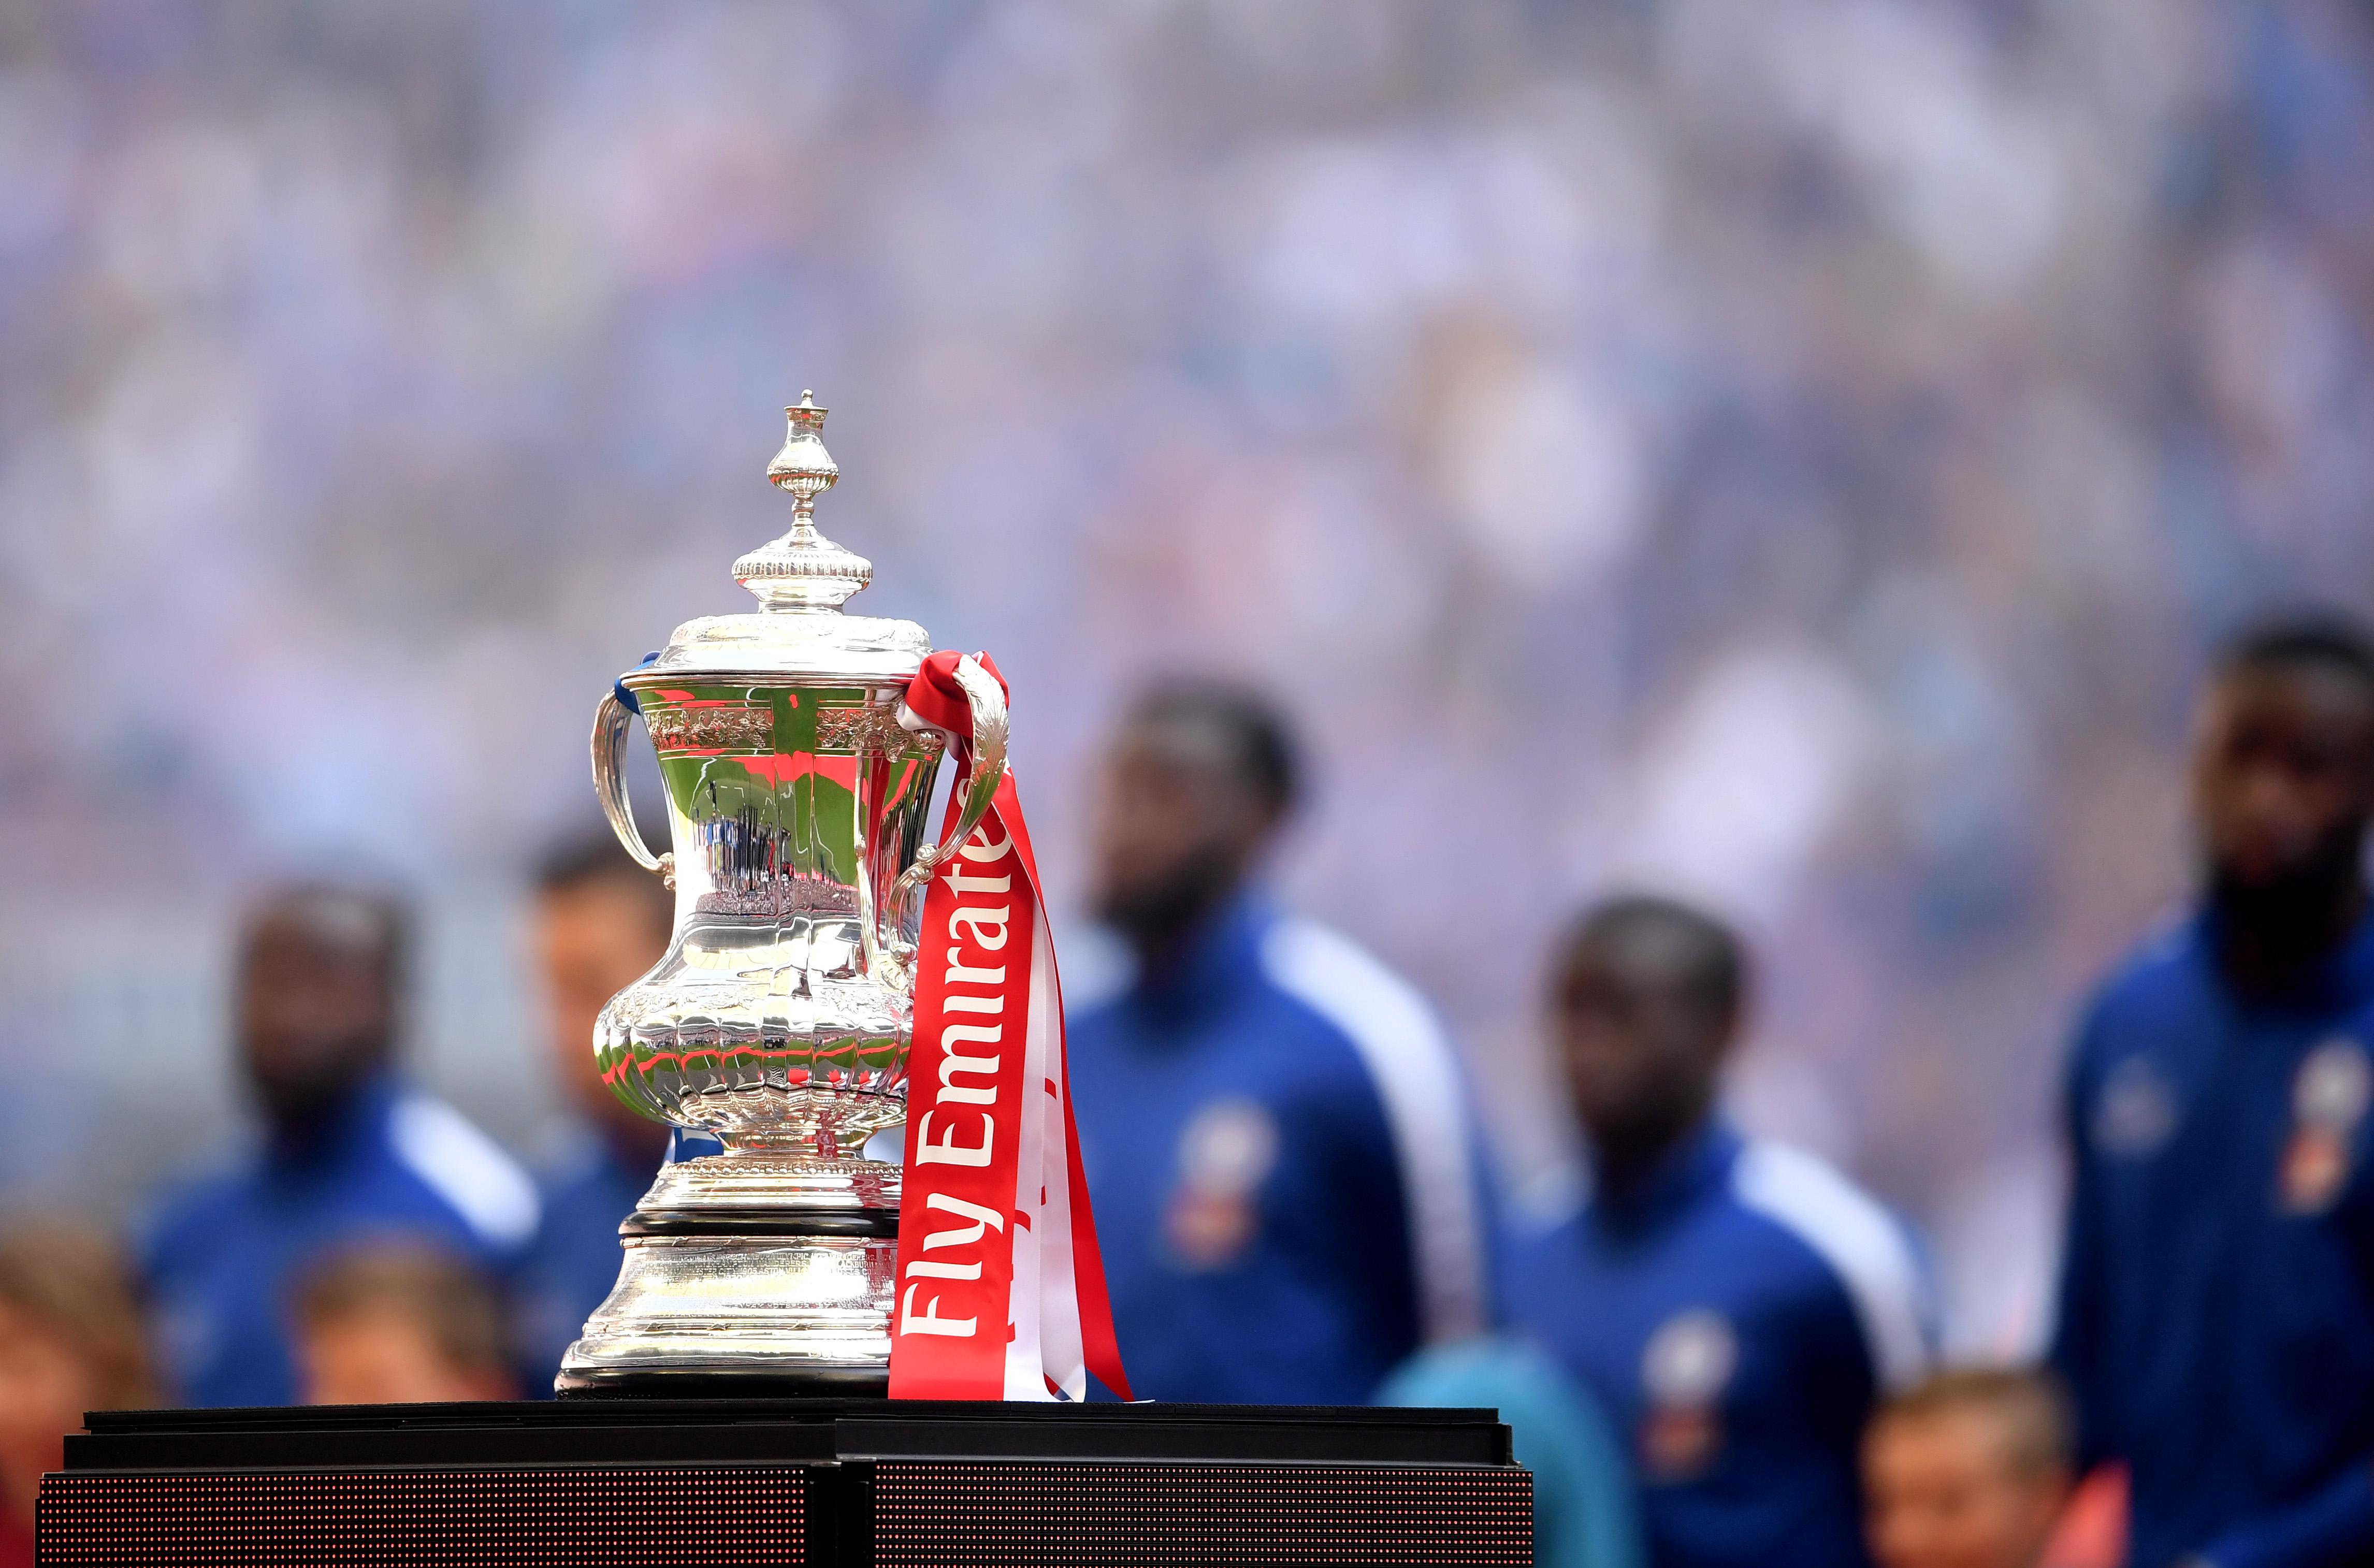 Unusual Sheffield United FA Cup kickoff time explained ahead of AFC